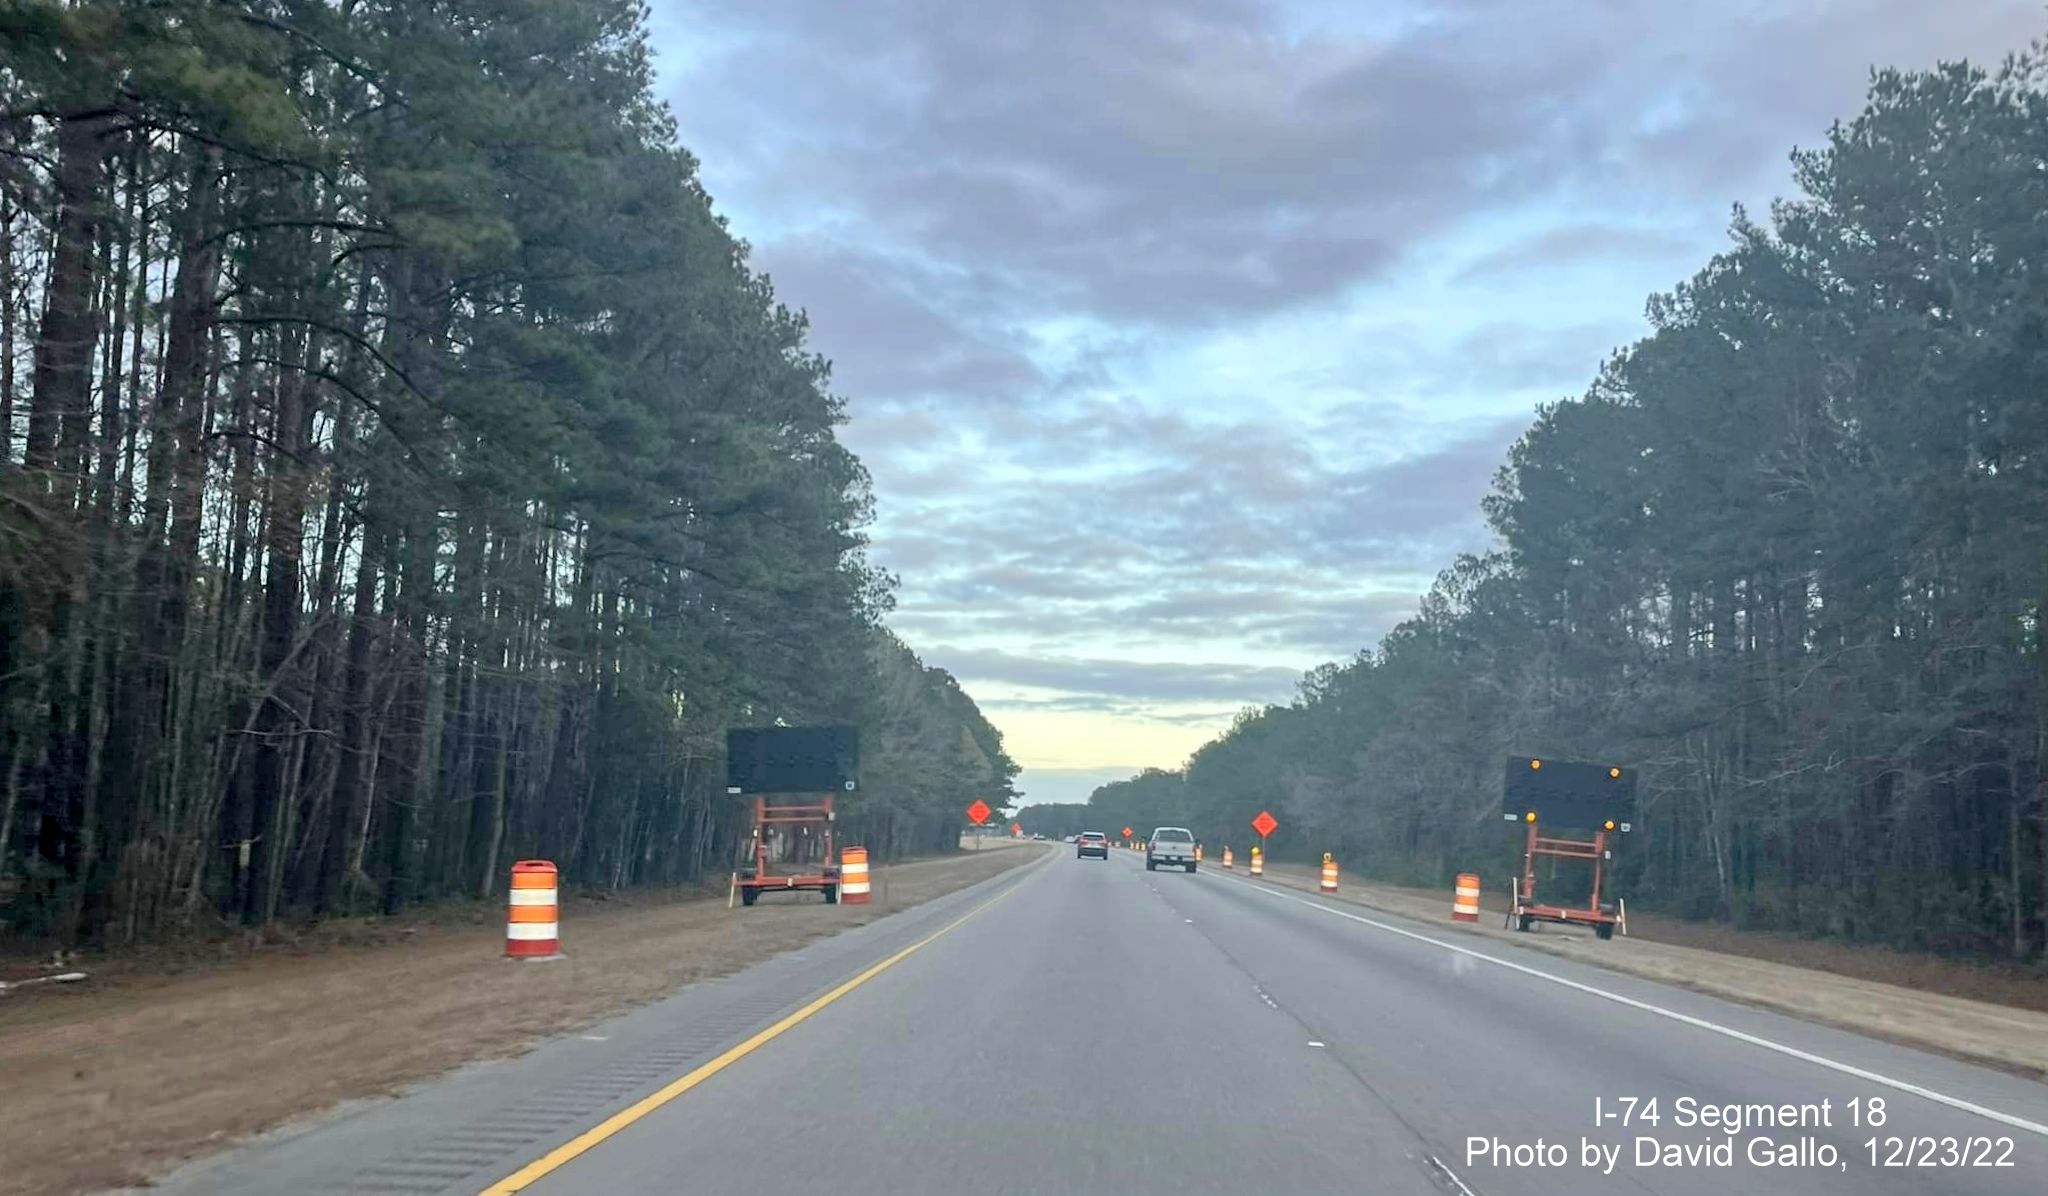 Image of approaching the Chauncey Town Road interchange work zone on US 74/76 East, by David Gallo, December 2022